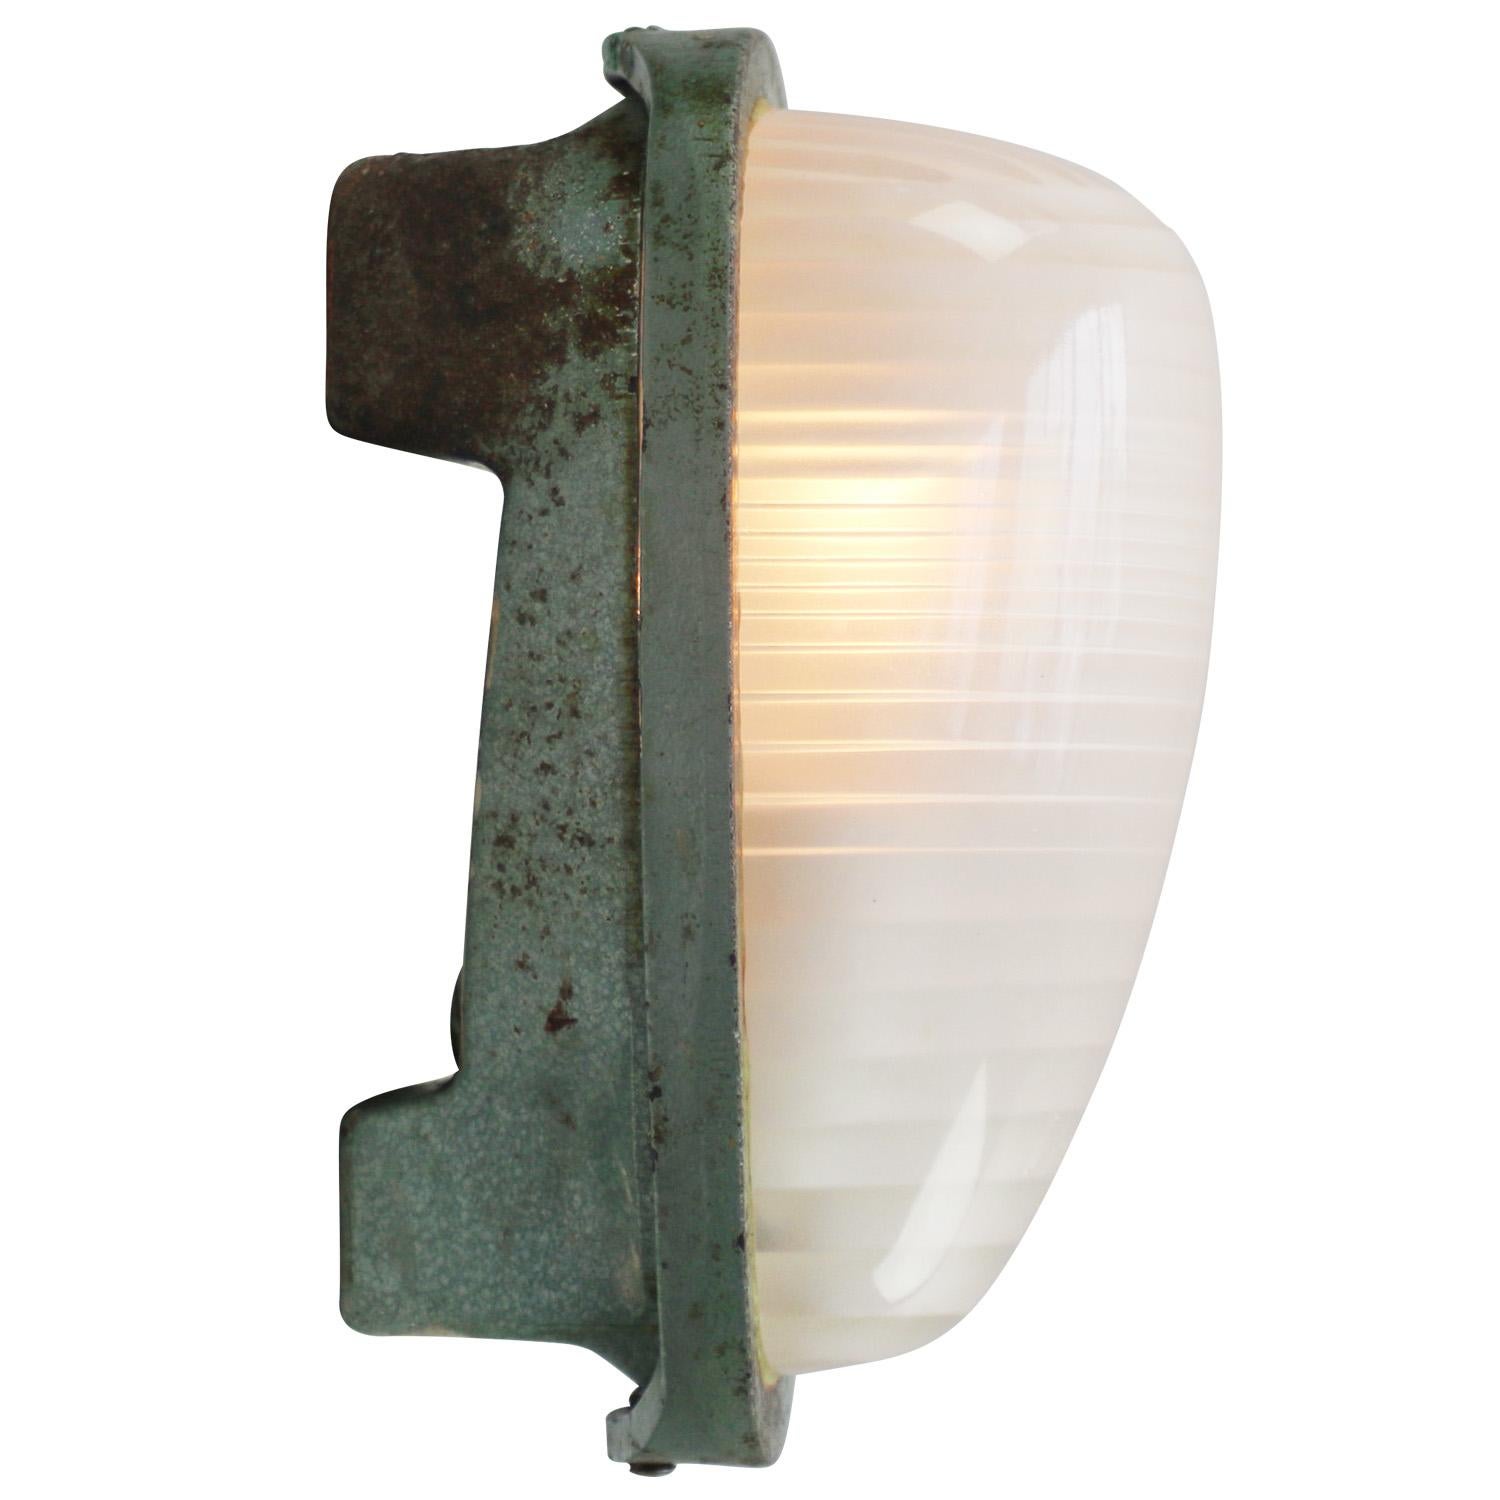 French Industrial wall / ceiling lamp by Holophane, France, model AE100
Green cast iron with frosted cut glass.

Weight : 3.00 kg / 6.6 lb

Priced per individual item. All lamps have been made suitable by international standards for incandescent